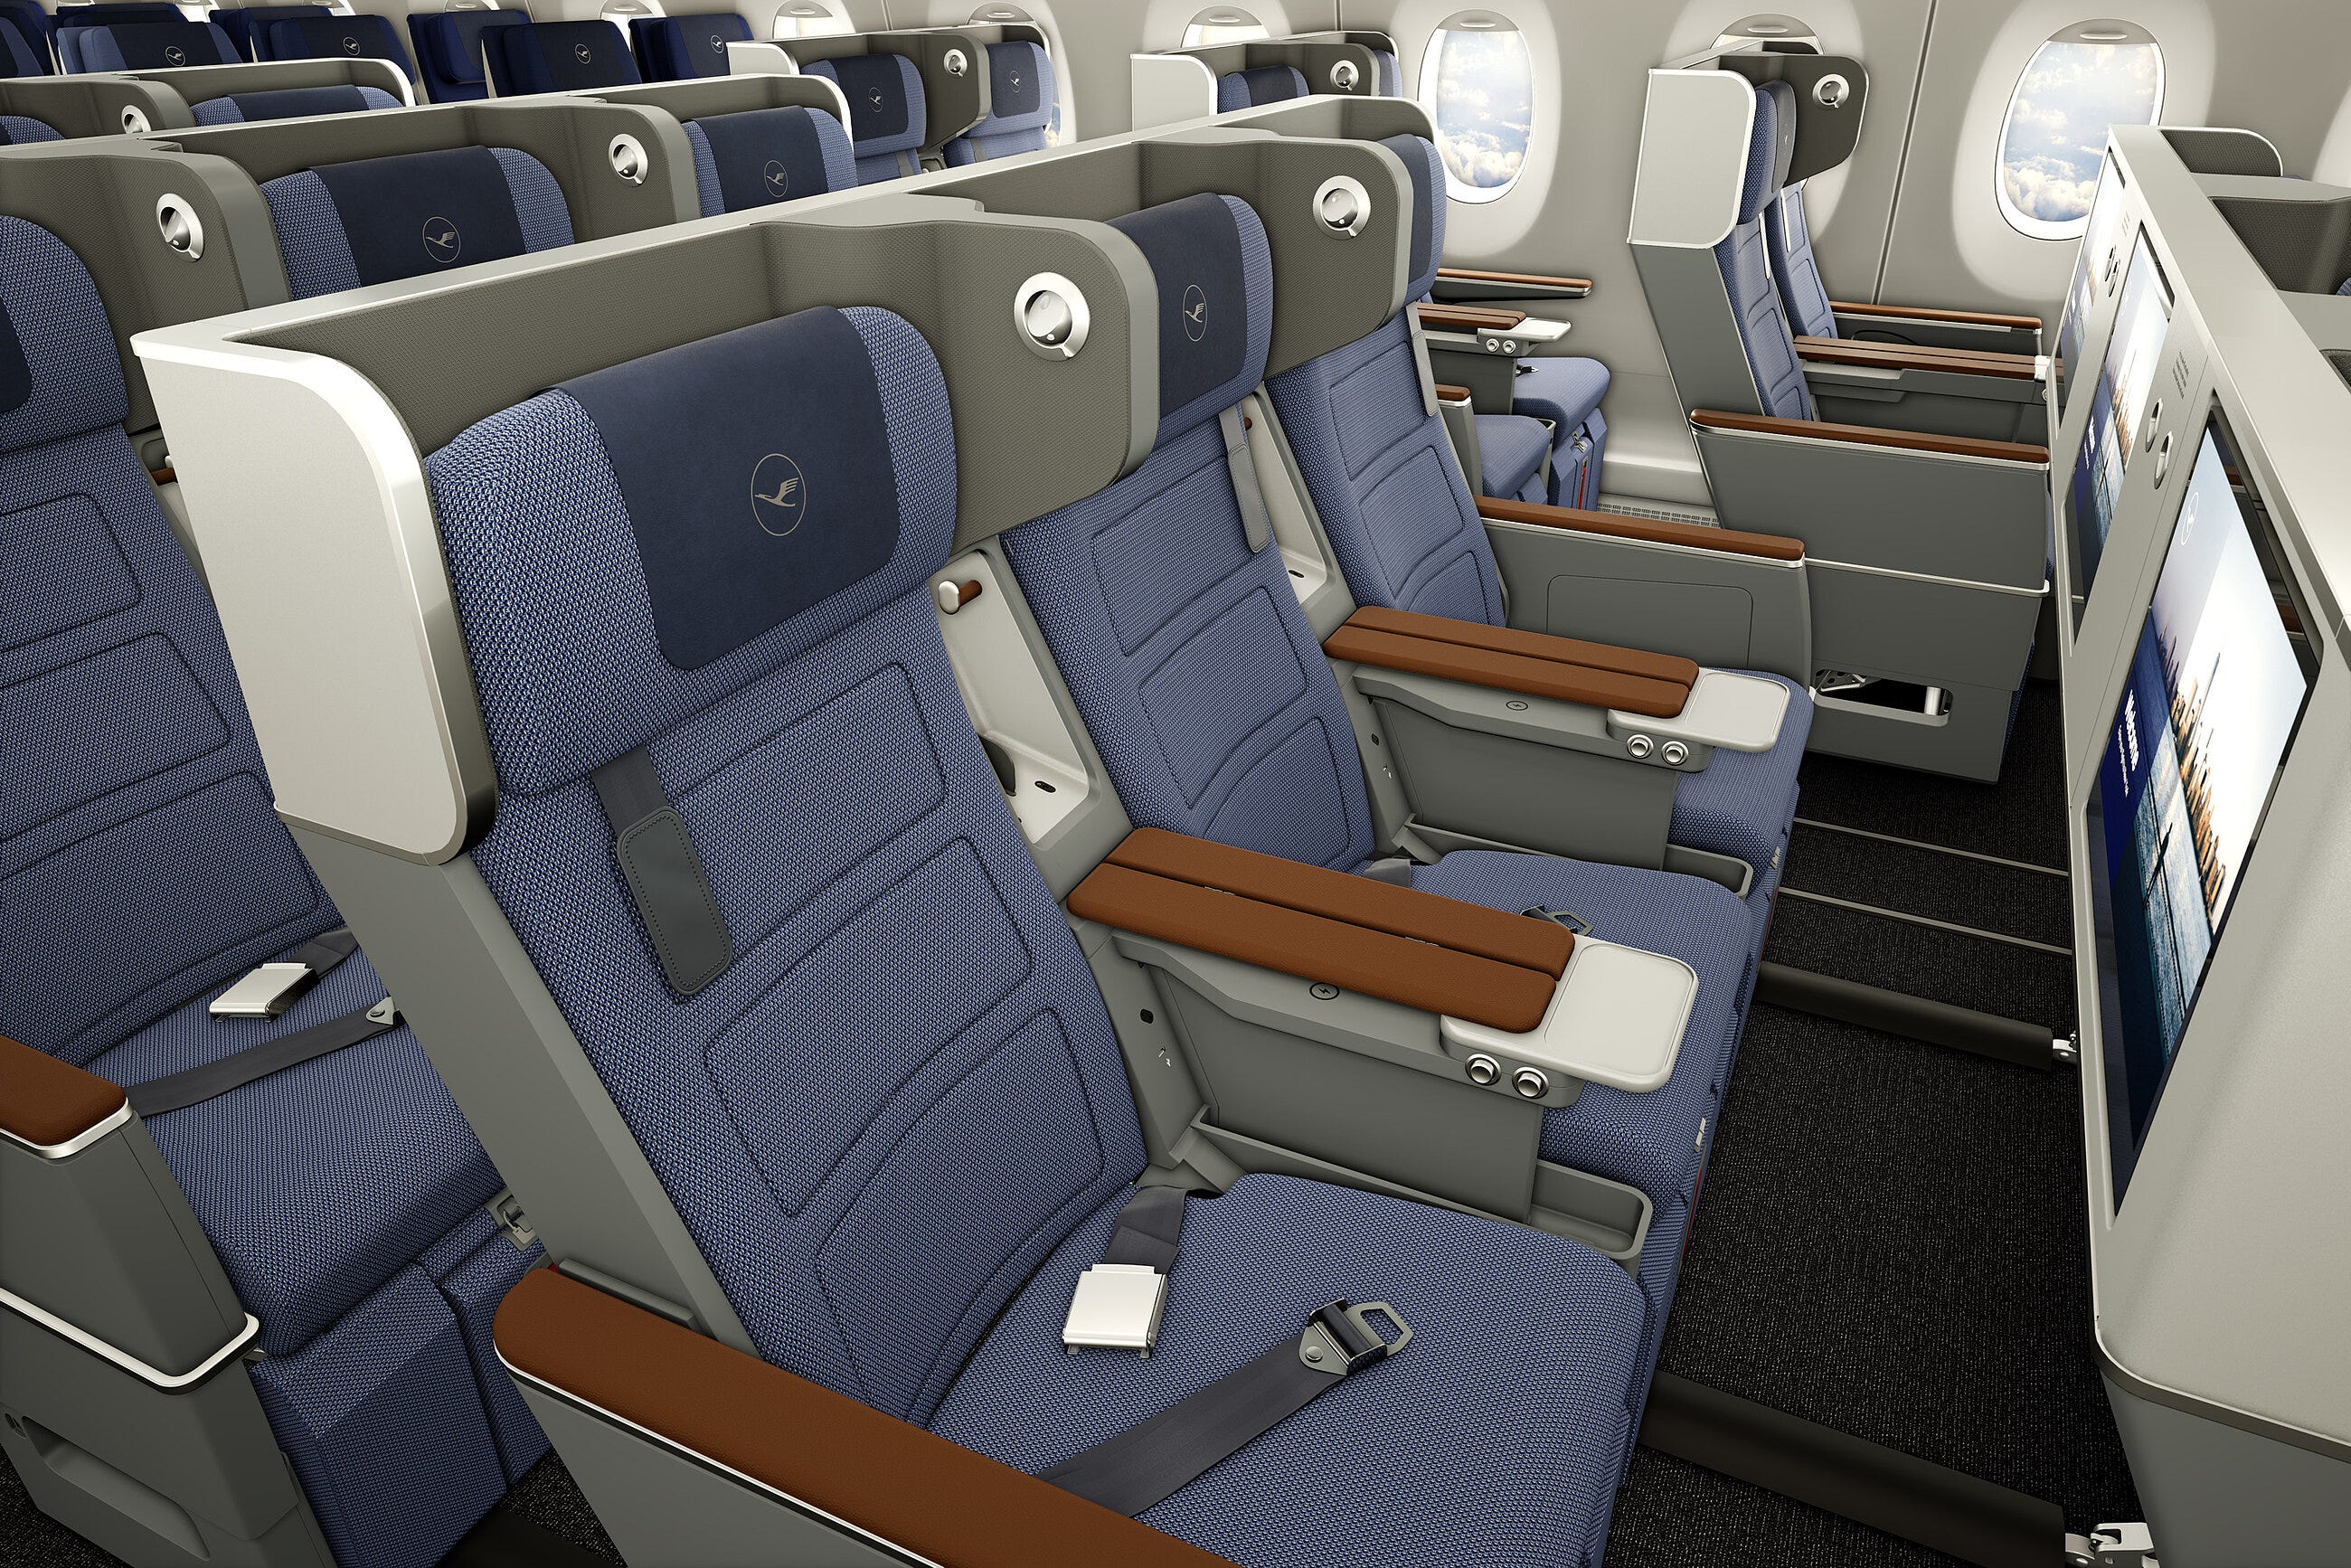 <p>According to Lufthansa, its Allegris premium economy features more legroom and a legrest and can be "<span>adjusted even further back than the current model."</span></p><p><span>The seat offers about 39 inches of pitch.</span></p>